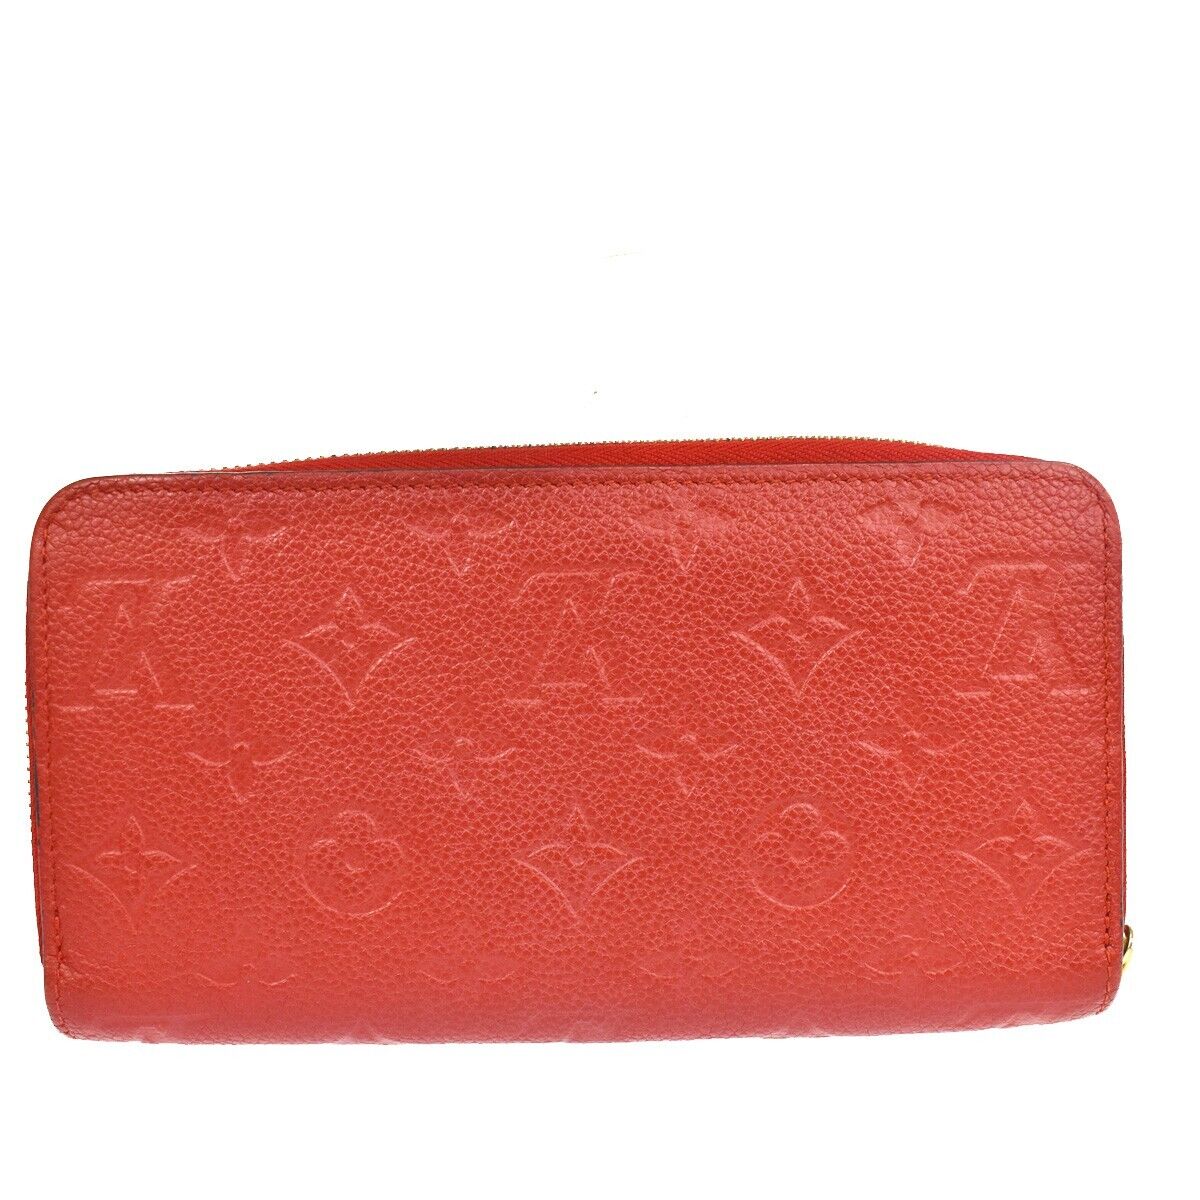 Pre-owned Louis Vuitton Portefeuille Zippy Red Leather Wallet  ()